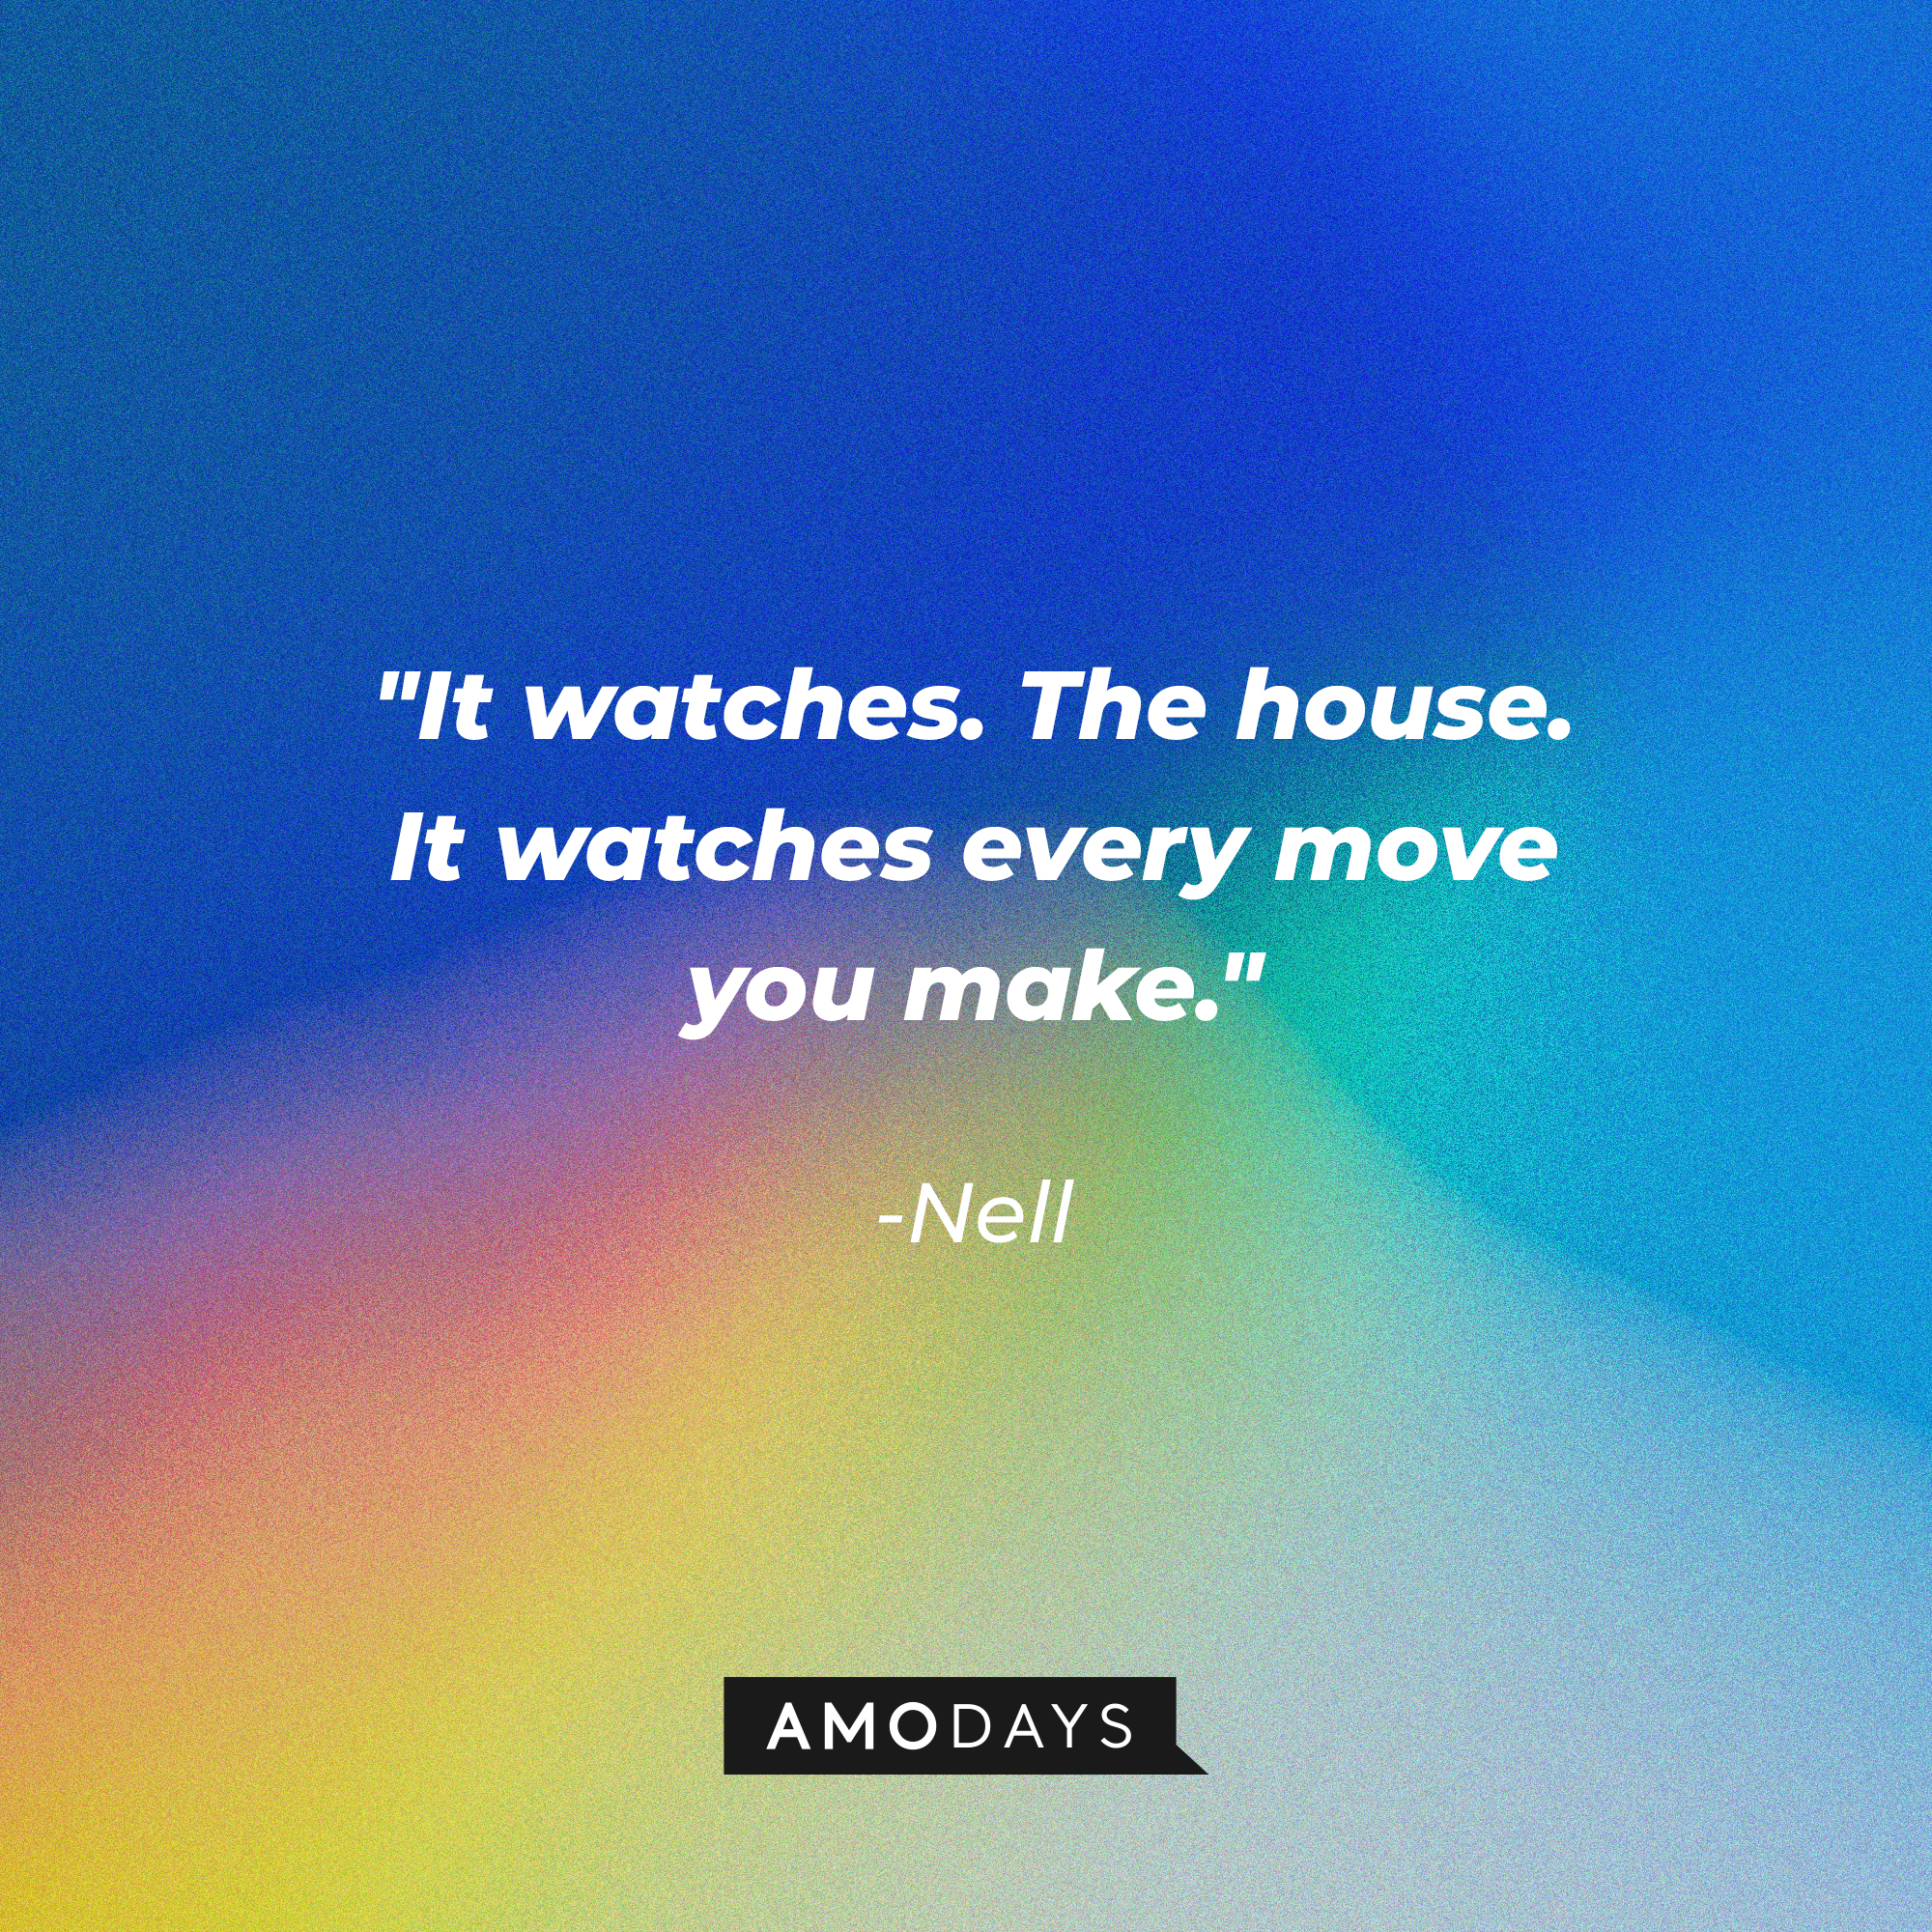 Nell's quote "It watches. The house. It watches every move you make." | Image: AmoDays